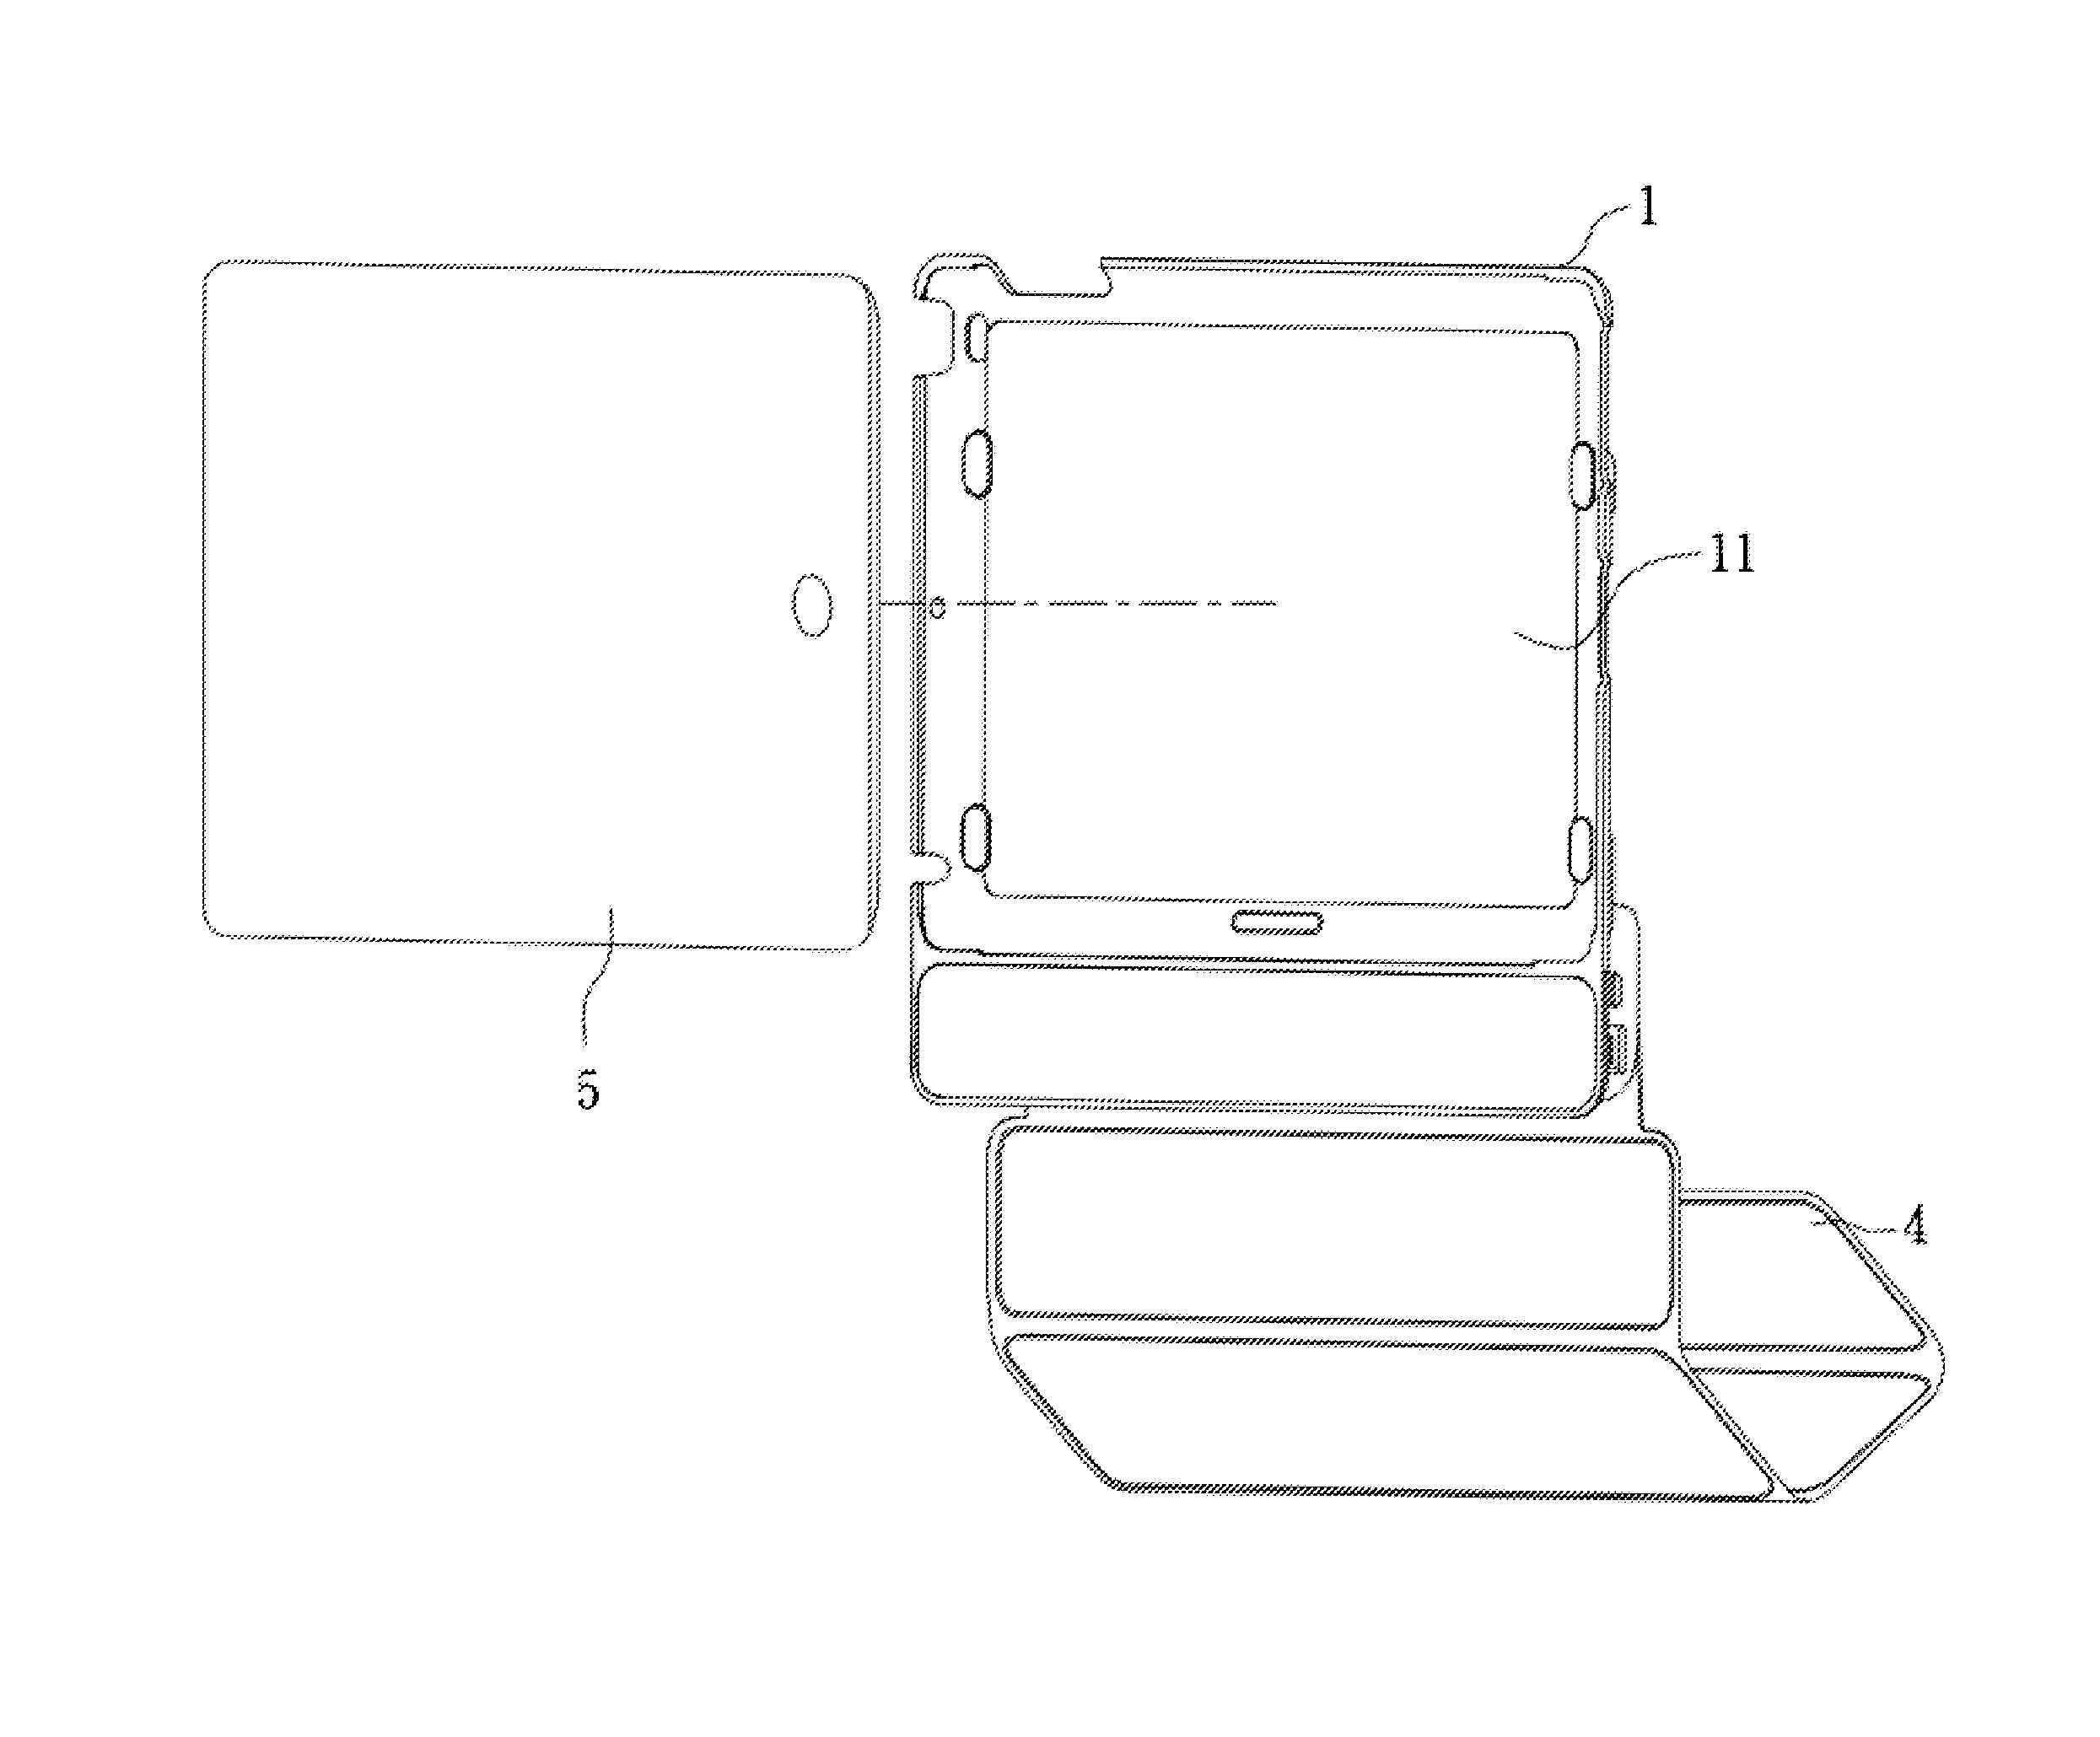 Protecting case assembly with foldable slim speaker for portable apparatus